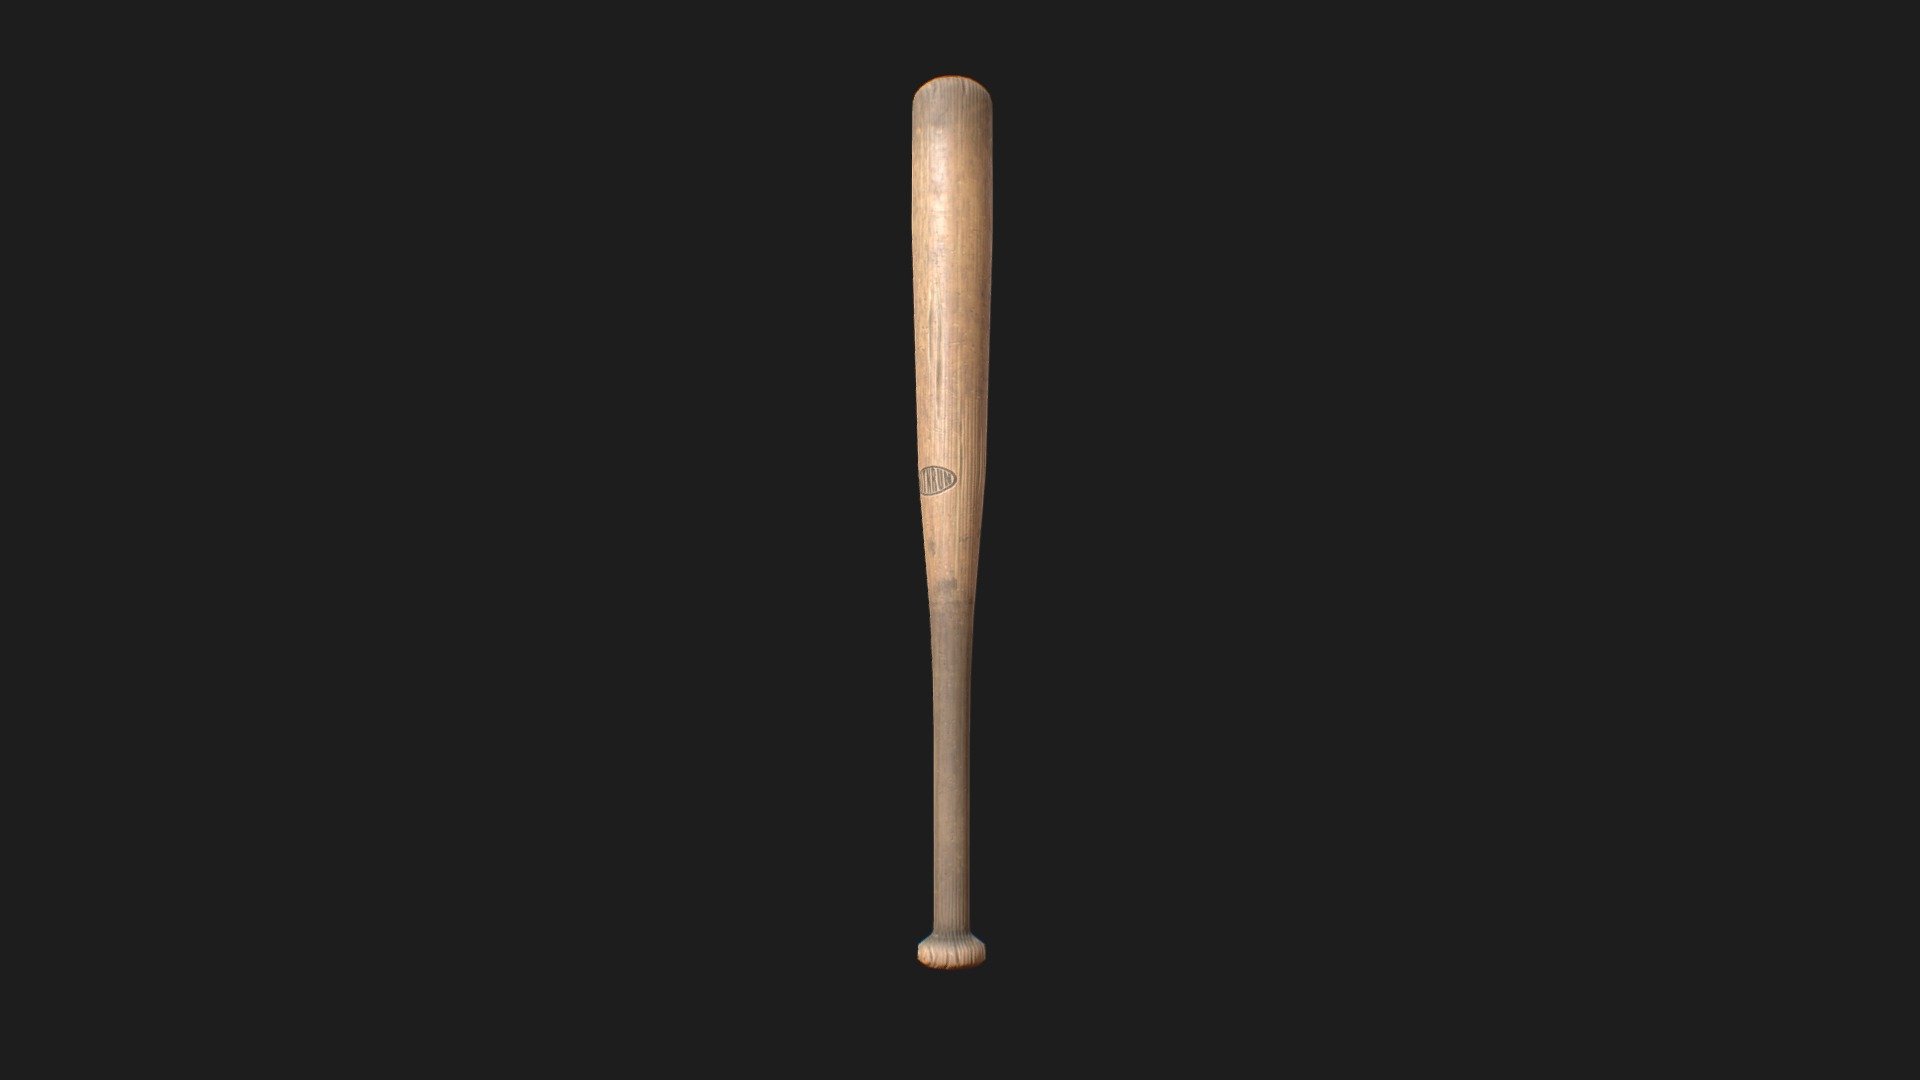 A worn old baseball bat made from wood!
Made in blender, baked in blender, textured in Quixel. Low poly and game ready.
2k PBR maps - Wooden Basebal Bat - 3D model by MelonMan 3d model